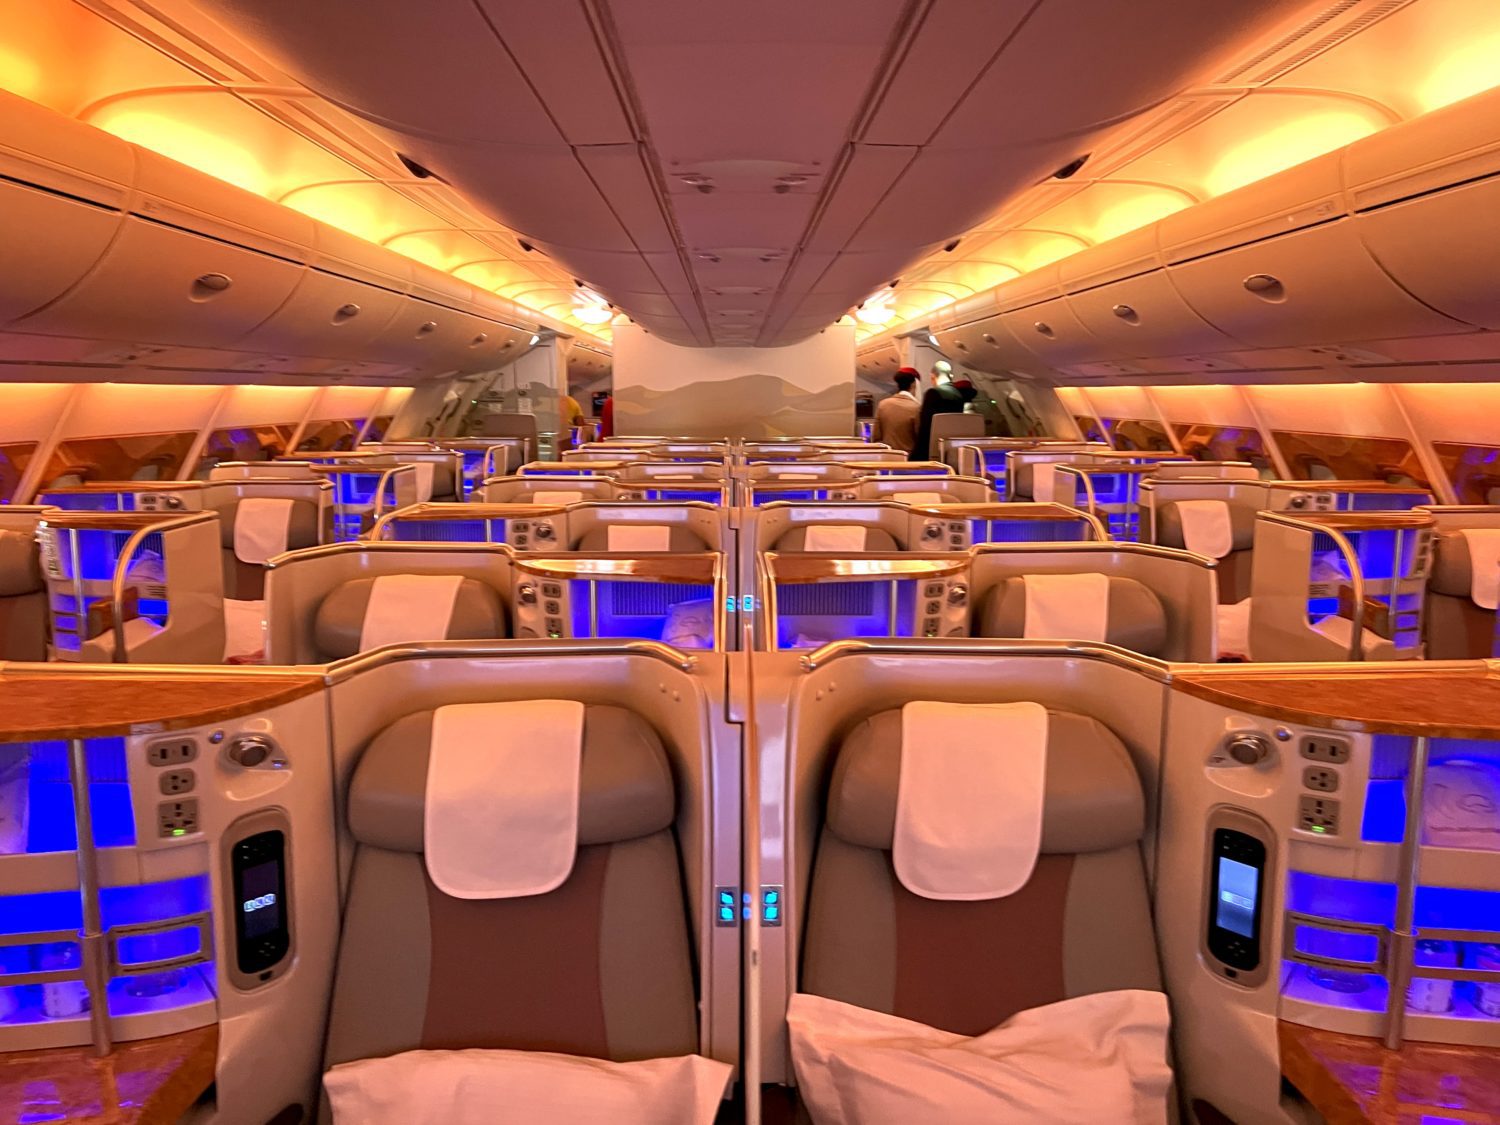 What is the best way to get cheap Emirates business class tickets?